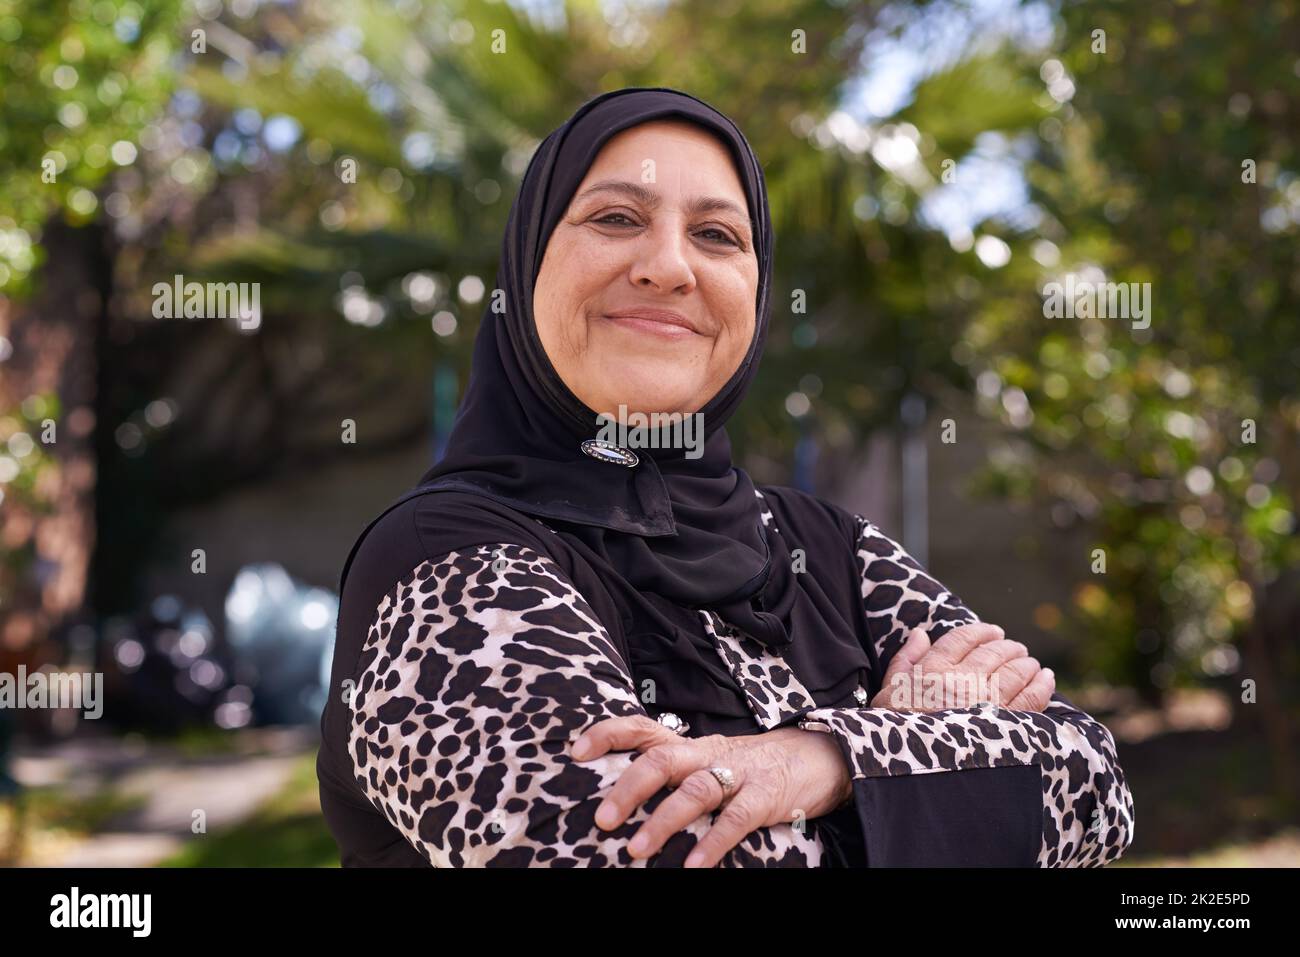 She loves her heritage. Portrait of a mature muslim woman standing outside. Stock Photo